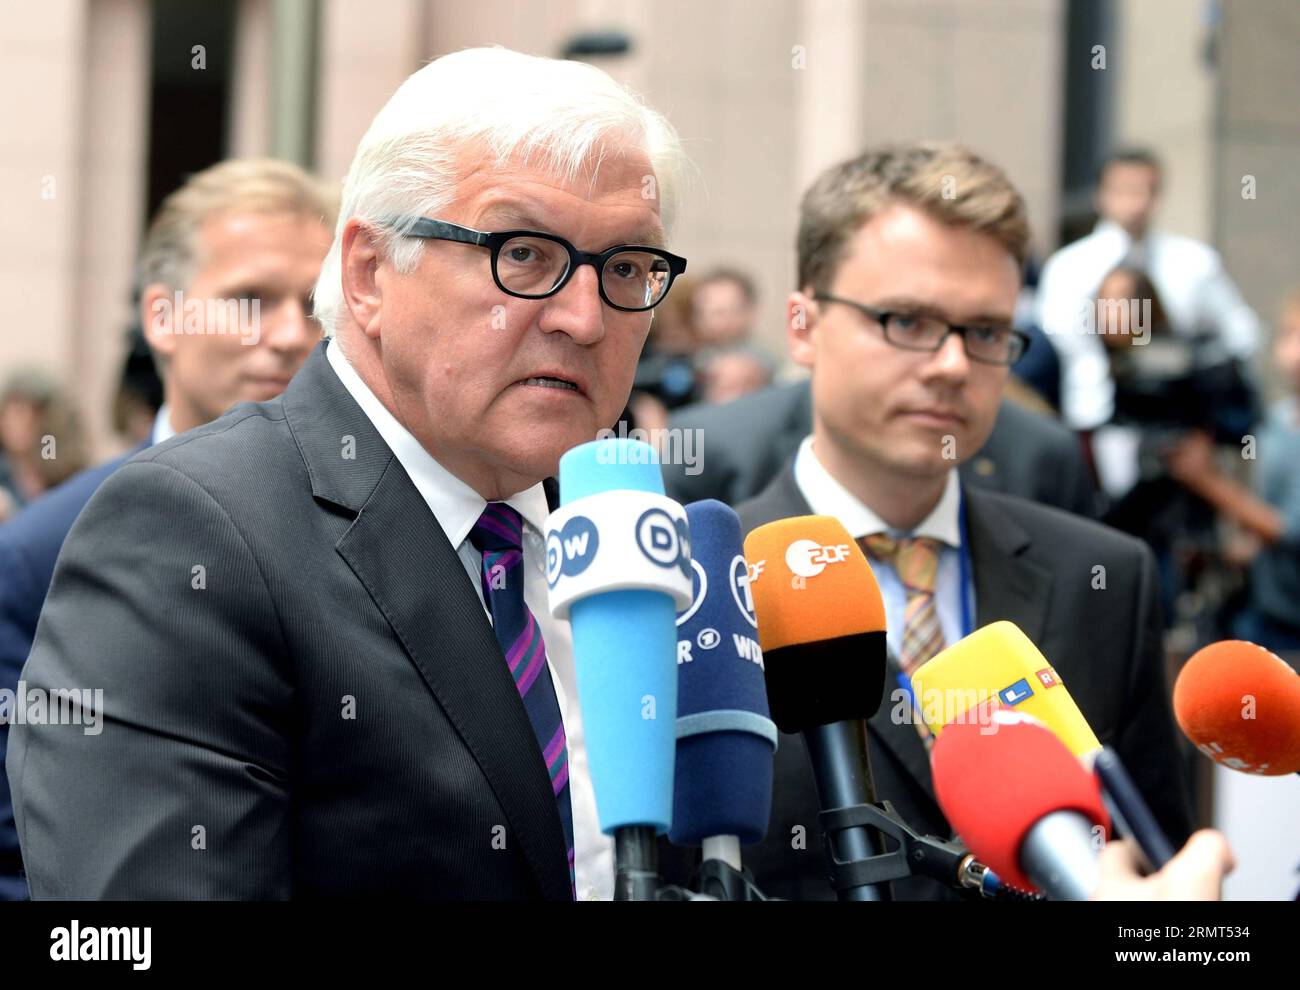 (140815) -- BRUSSELS, Aug. 15, 2014 -- Photo provided by ion (EU) shows German Foreign Minister Frank-Walter Steinmeier speaking to journalists when he attends an emergency meeting in Brussels, Belgium, Aug. 15, 2014. The EU on Friday gave green light for individual EU countries to send weapons to Iraqi Kurds battling Islamic militants in the north of Iraq. NO COMMERCIAL USE BELGIUM-BRUSSELS-EU-EMERGENCY MEETING-IRAQ thexCouncilxofxthexEuropeanxUn PUBLICATIONxNOTxINxCHN   Brussels Aug 15 2014 Photo provided by Ion EU Shows German Foreign Ministers Frank Walter Stein Meier Speaking to Journalis Stock Photo